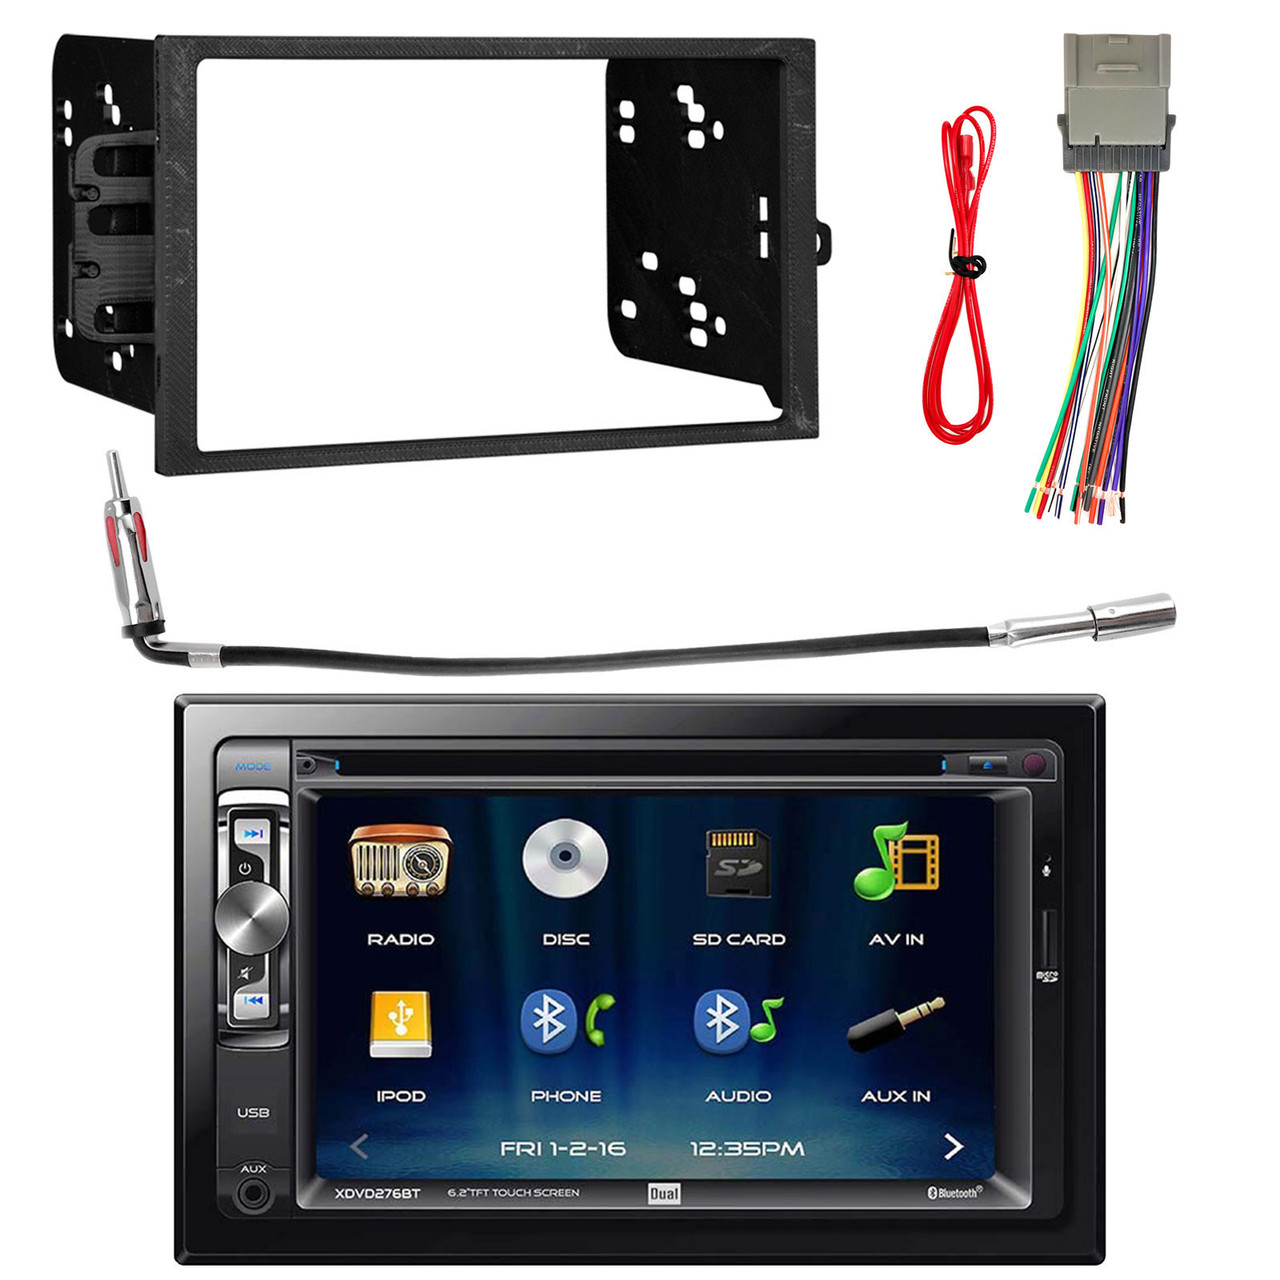 1998-2001 Double Din Radio Mount Kit For Stereo CD Player Install W Wire Harness 